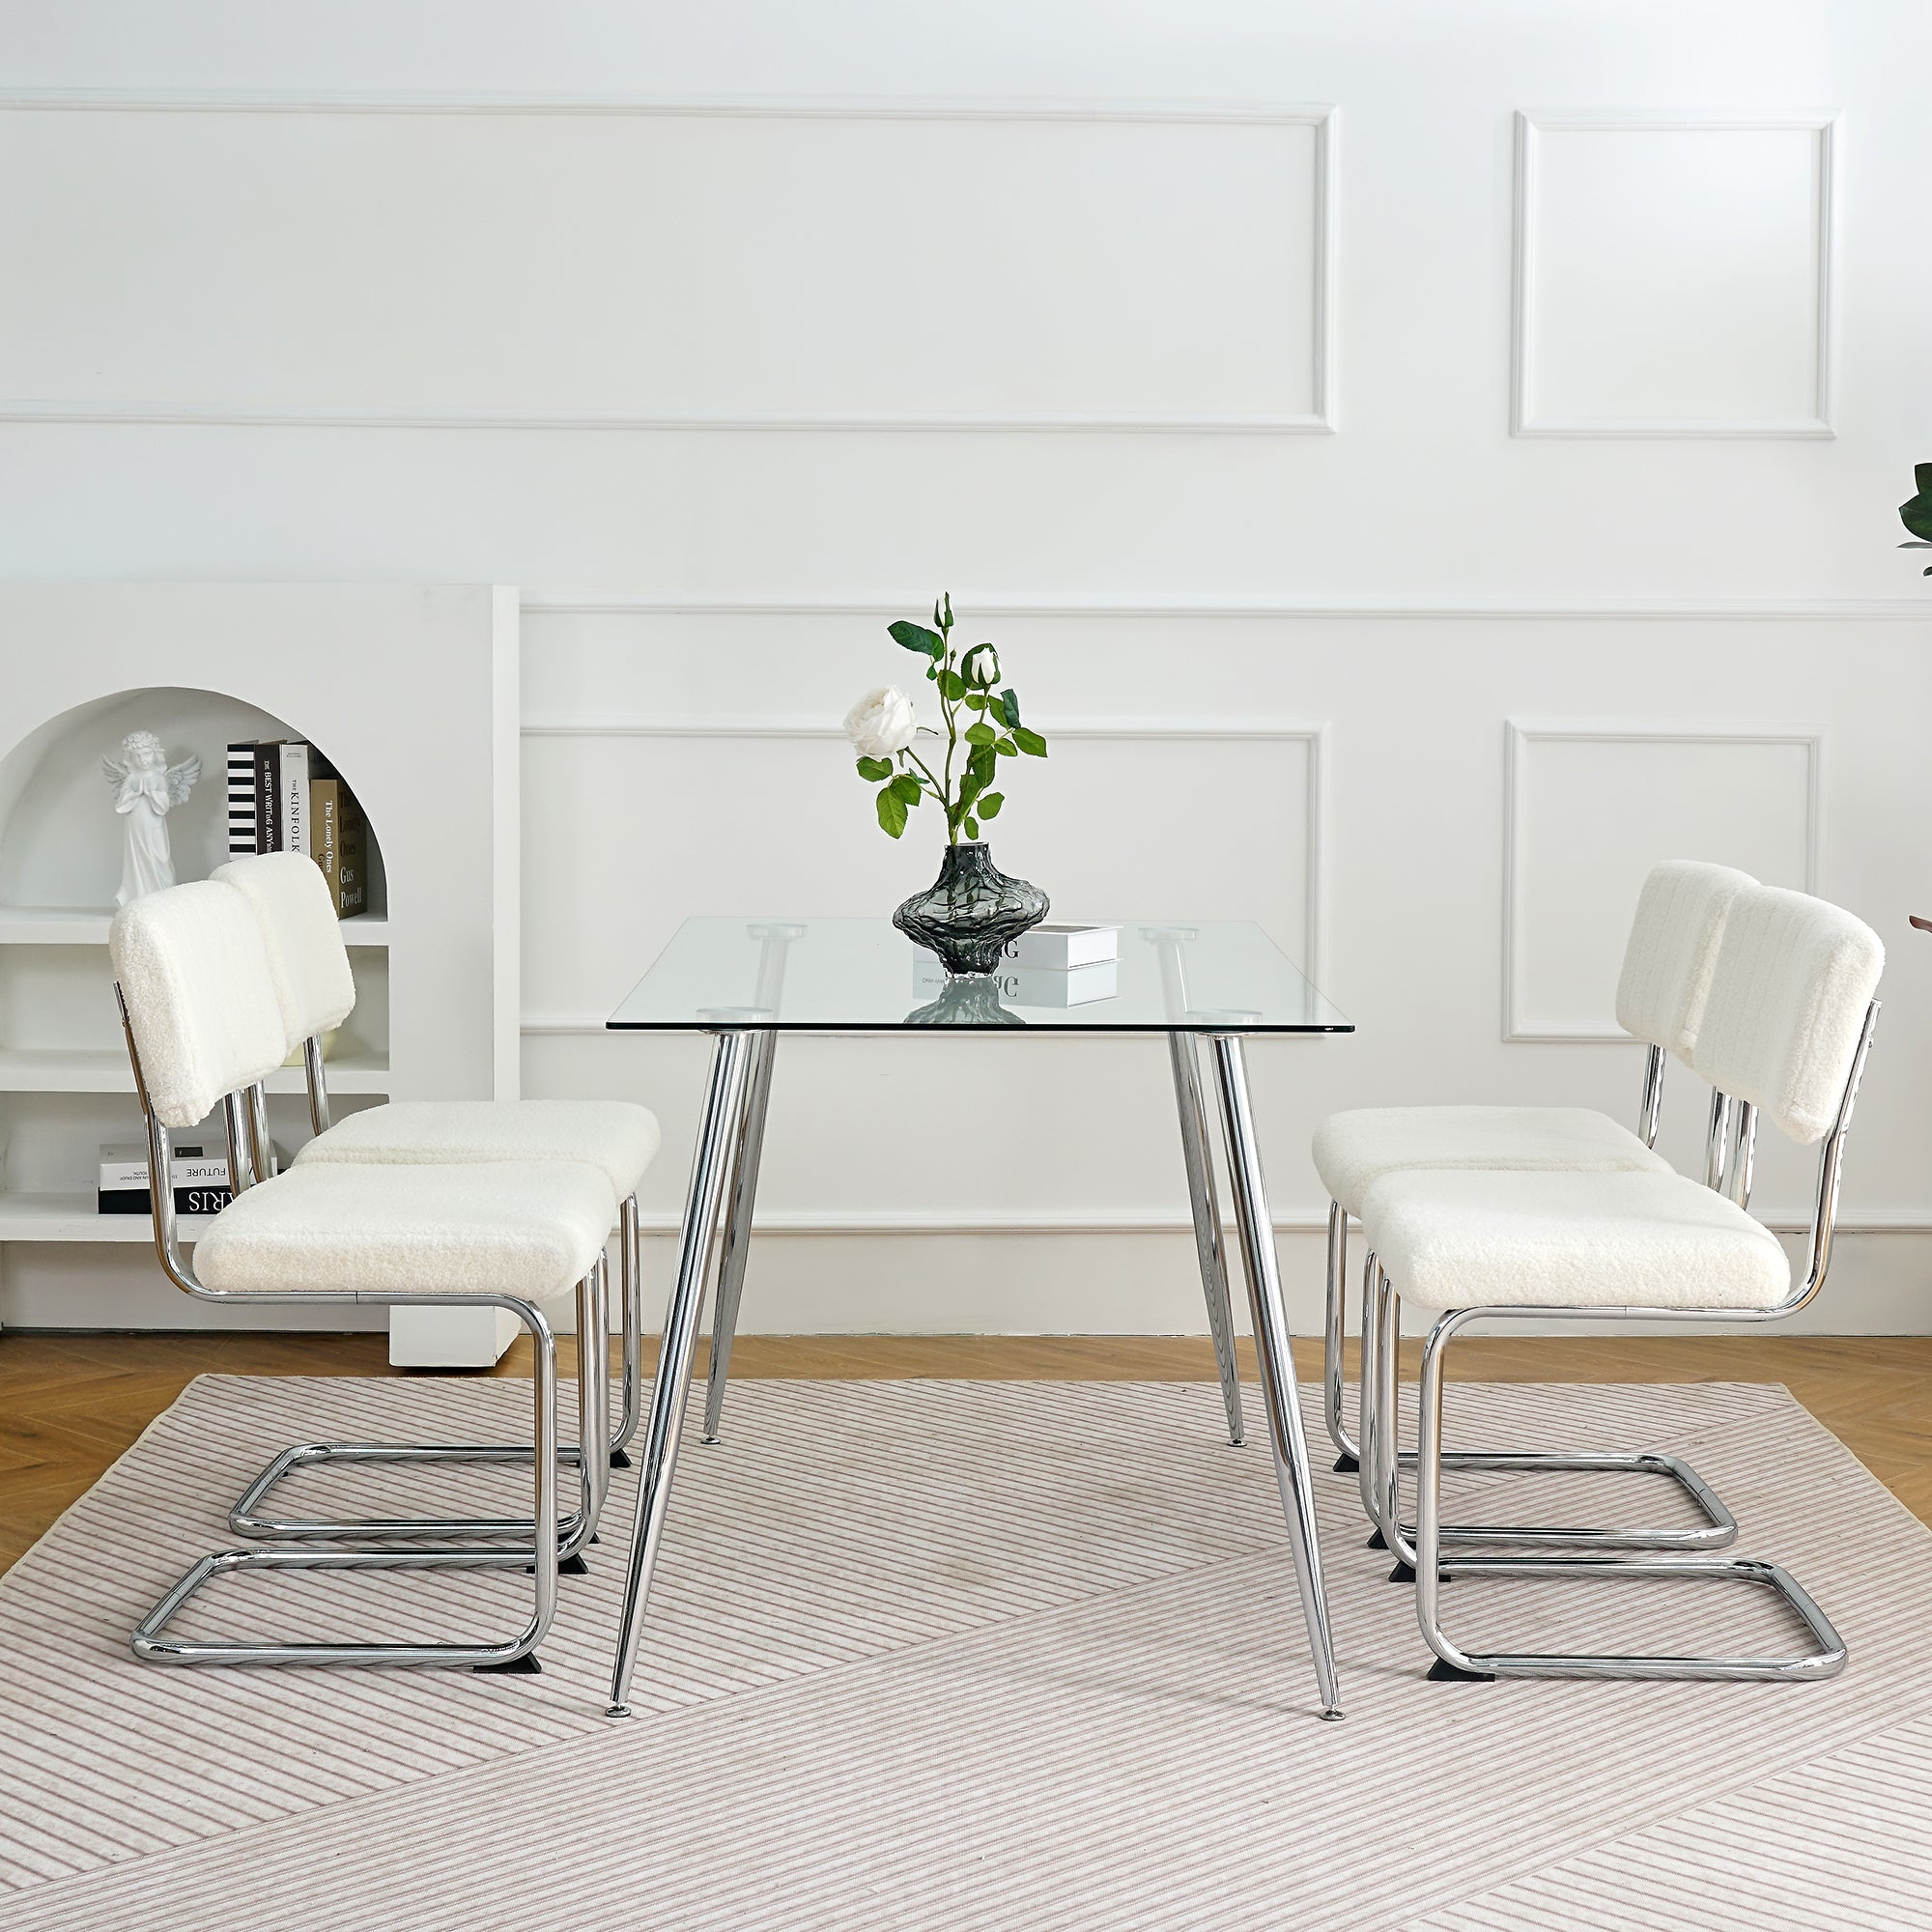 Luxury Dining Chairs with Silver Metal Legs (Set of 4) - White